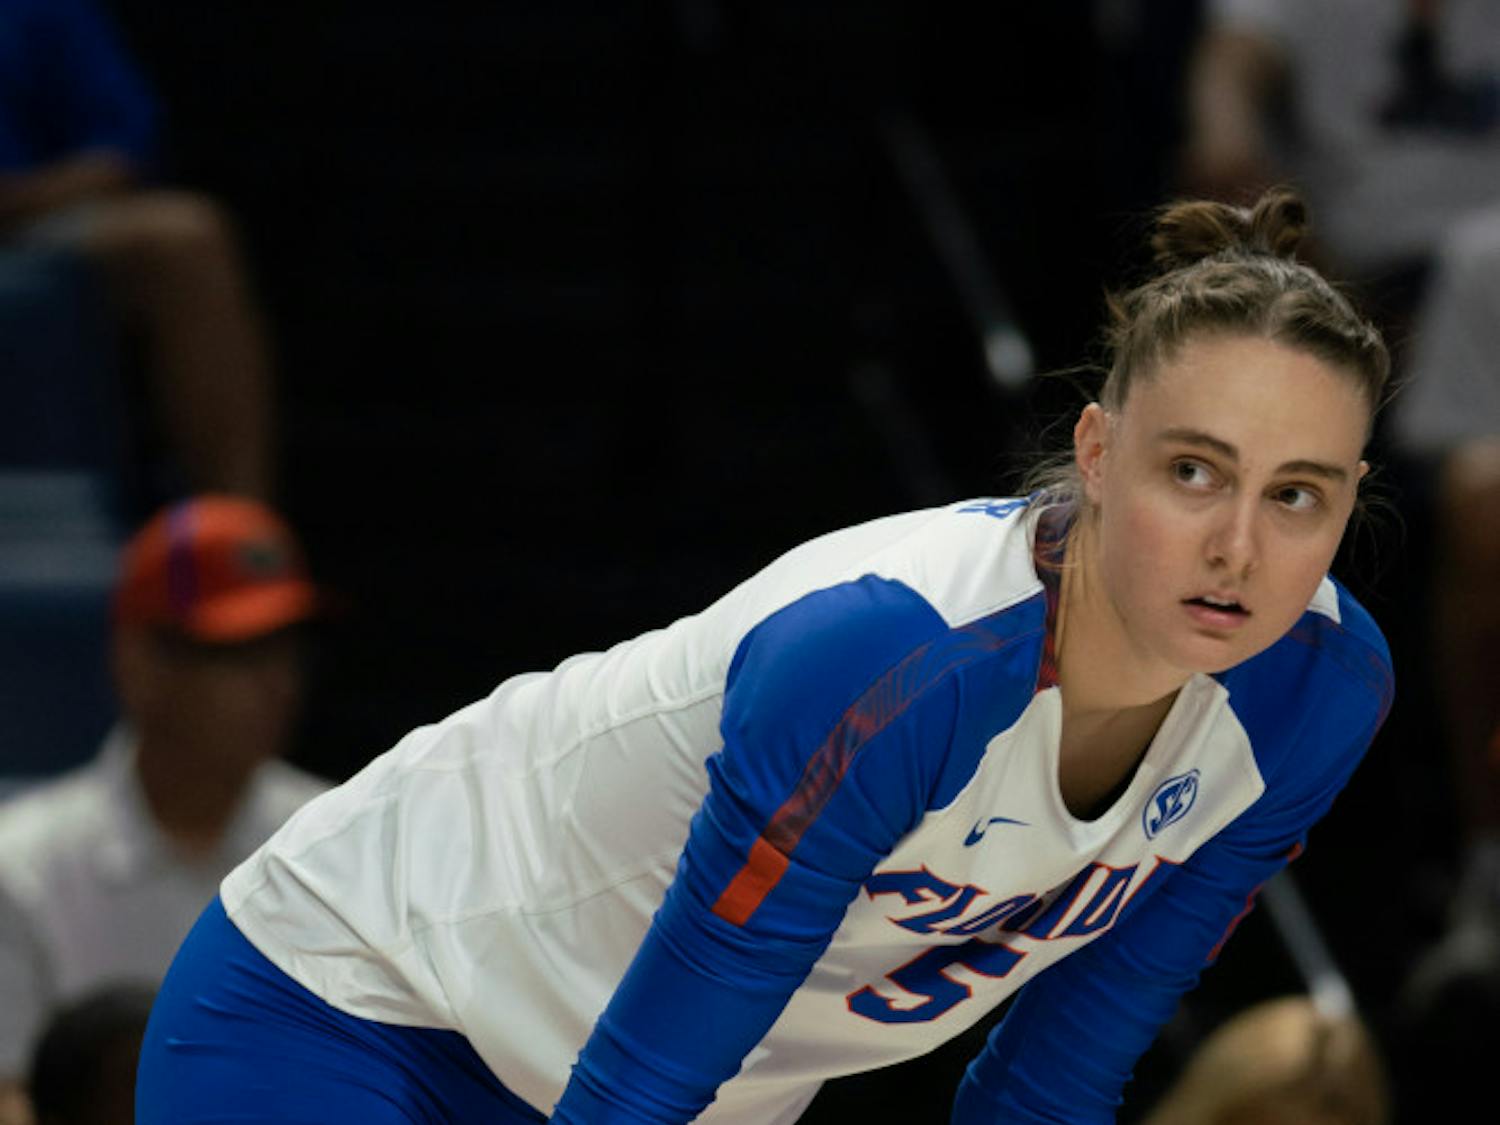 Middle blockers Rachael Kramer (pictured) and Taelor Kellum combined for 22 kills in Florida’s sweep over Alabama.